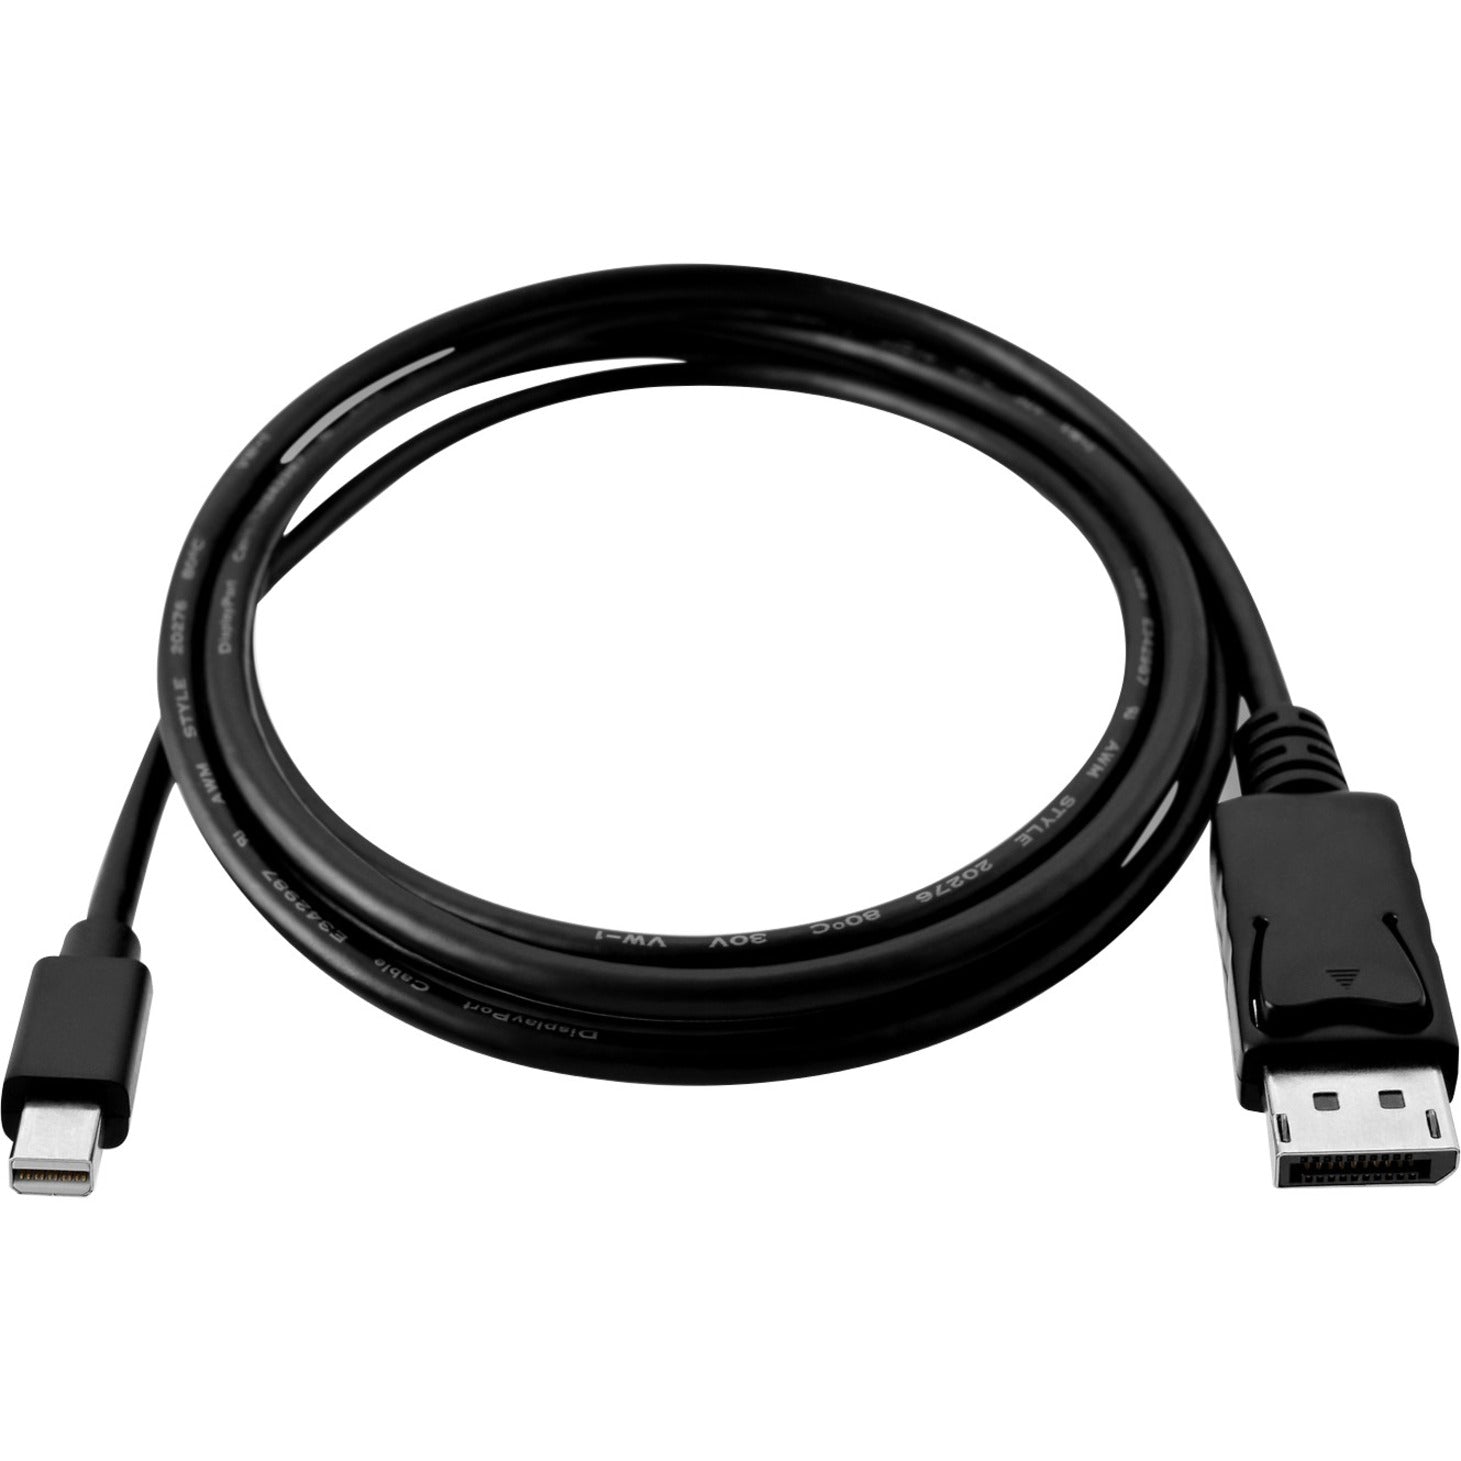 V7 Black Video Cable Displayport Male To Hdmi Male 3M 10Ft 